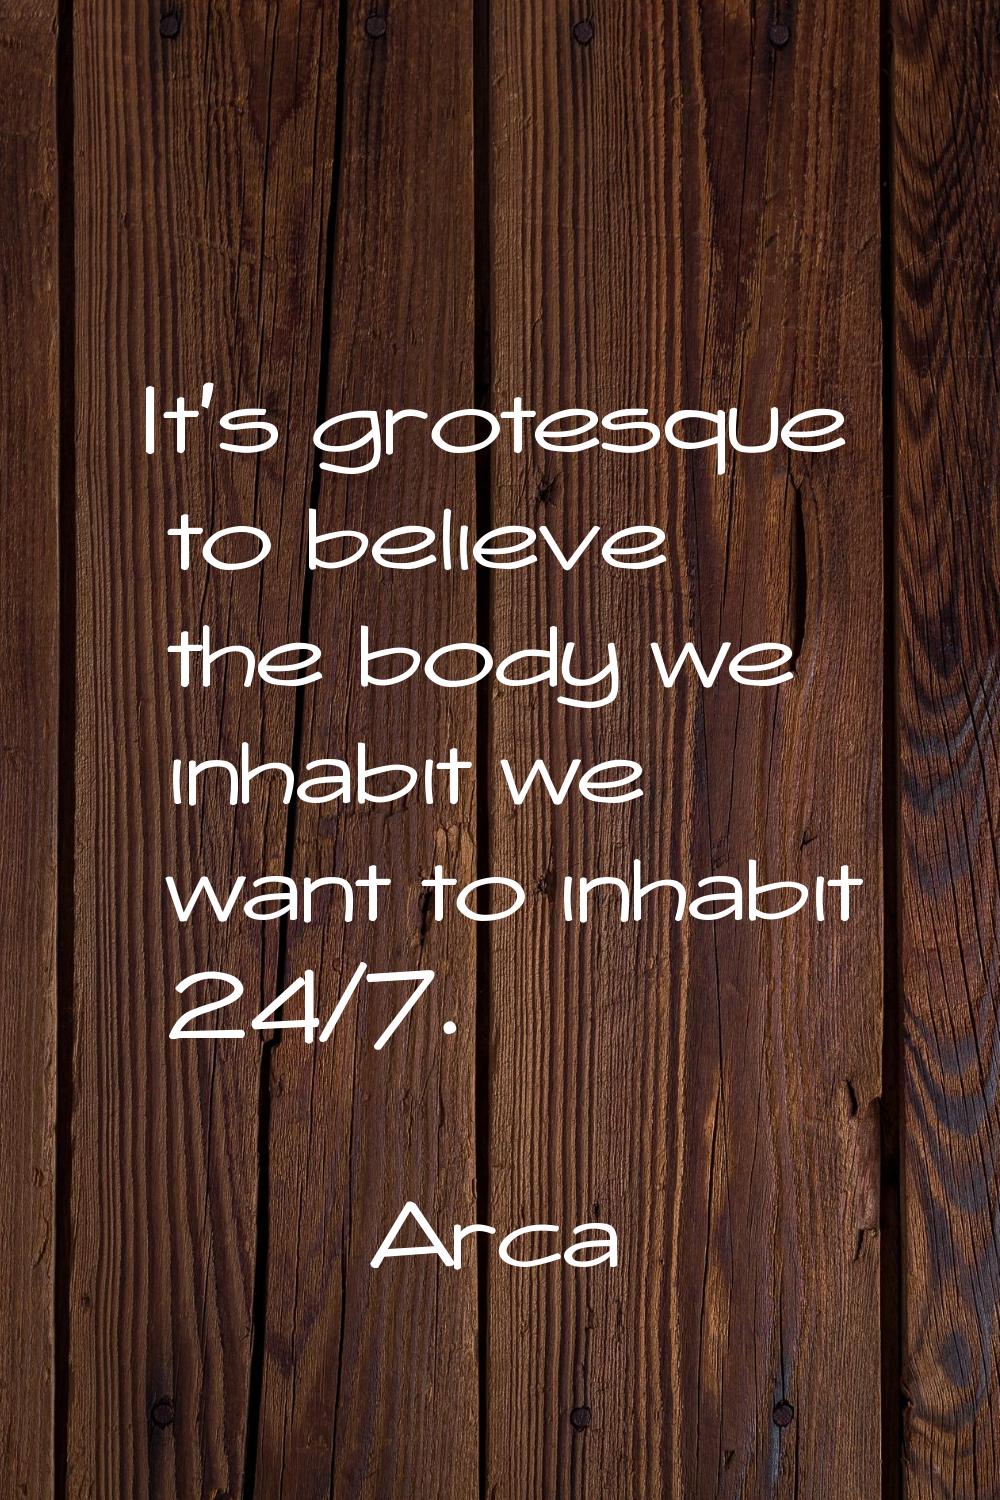 It's grotesque to believe the body we inhabit we want to inhabit 24/7.